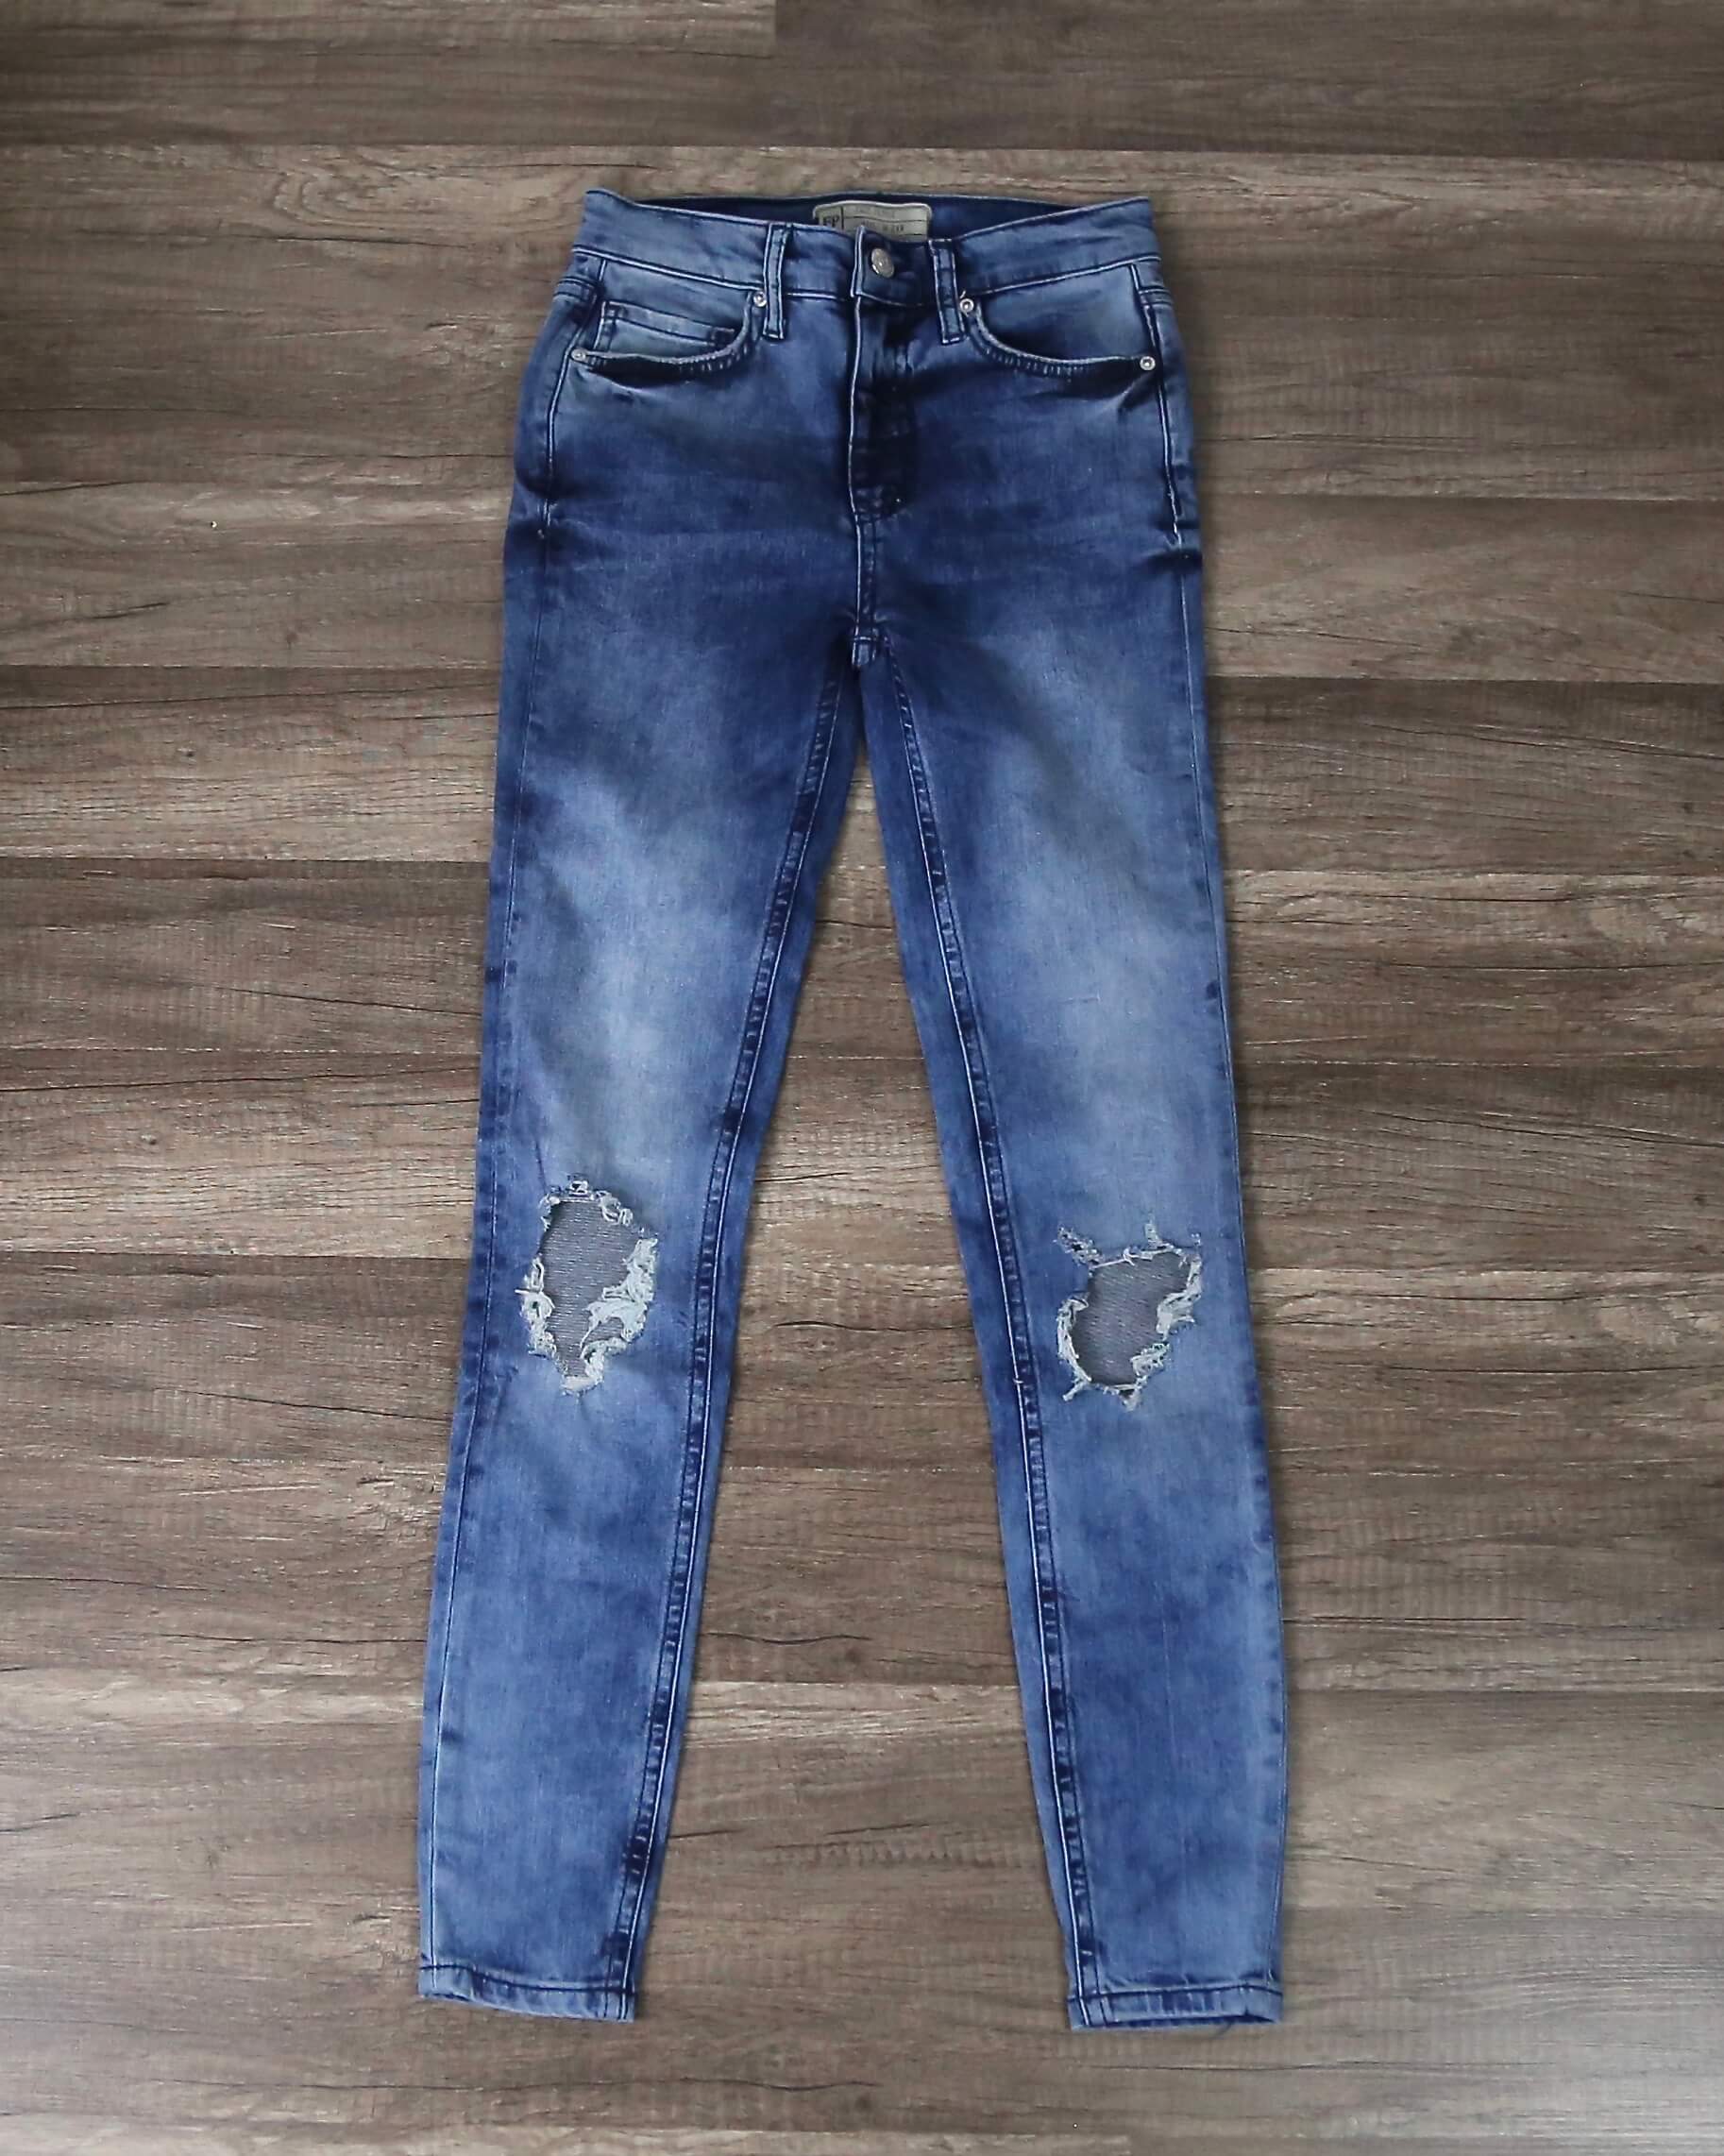 Free People - Busted High Rise Distressed Skinny Jeans in Blue/Turquoi ...